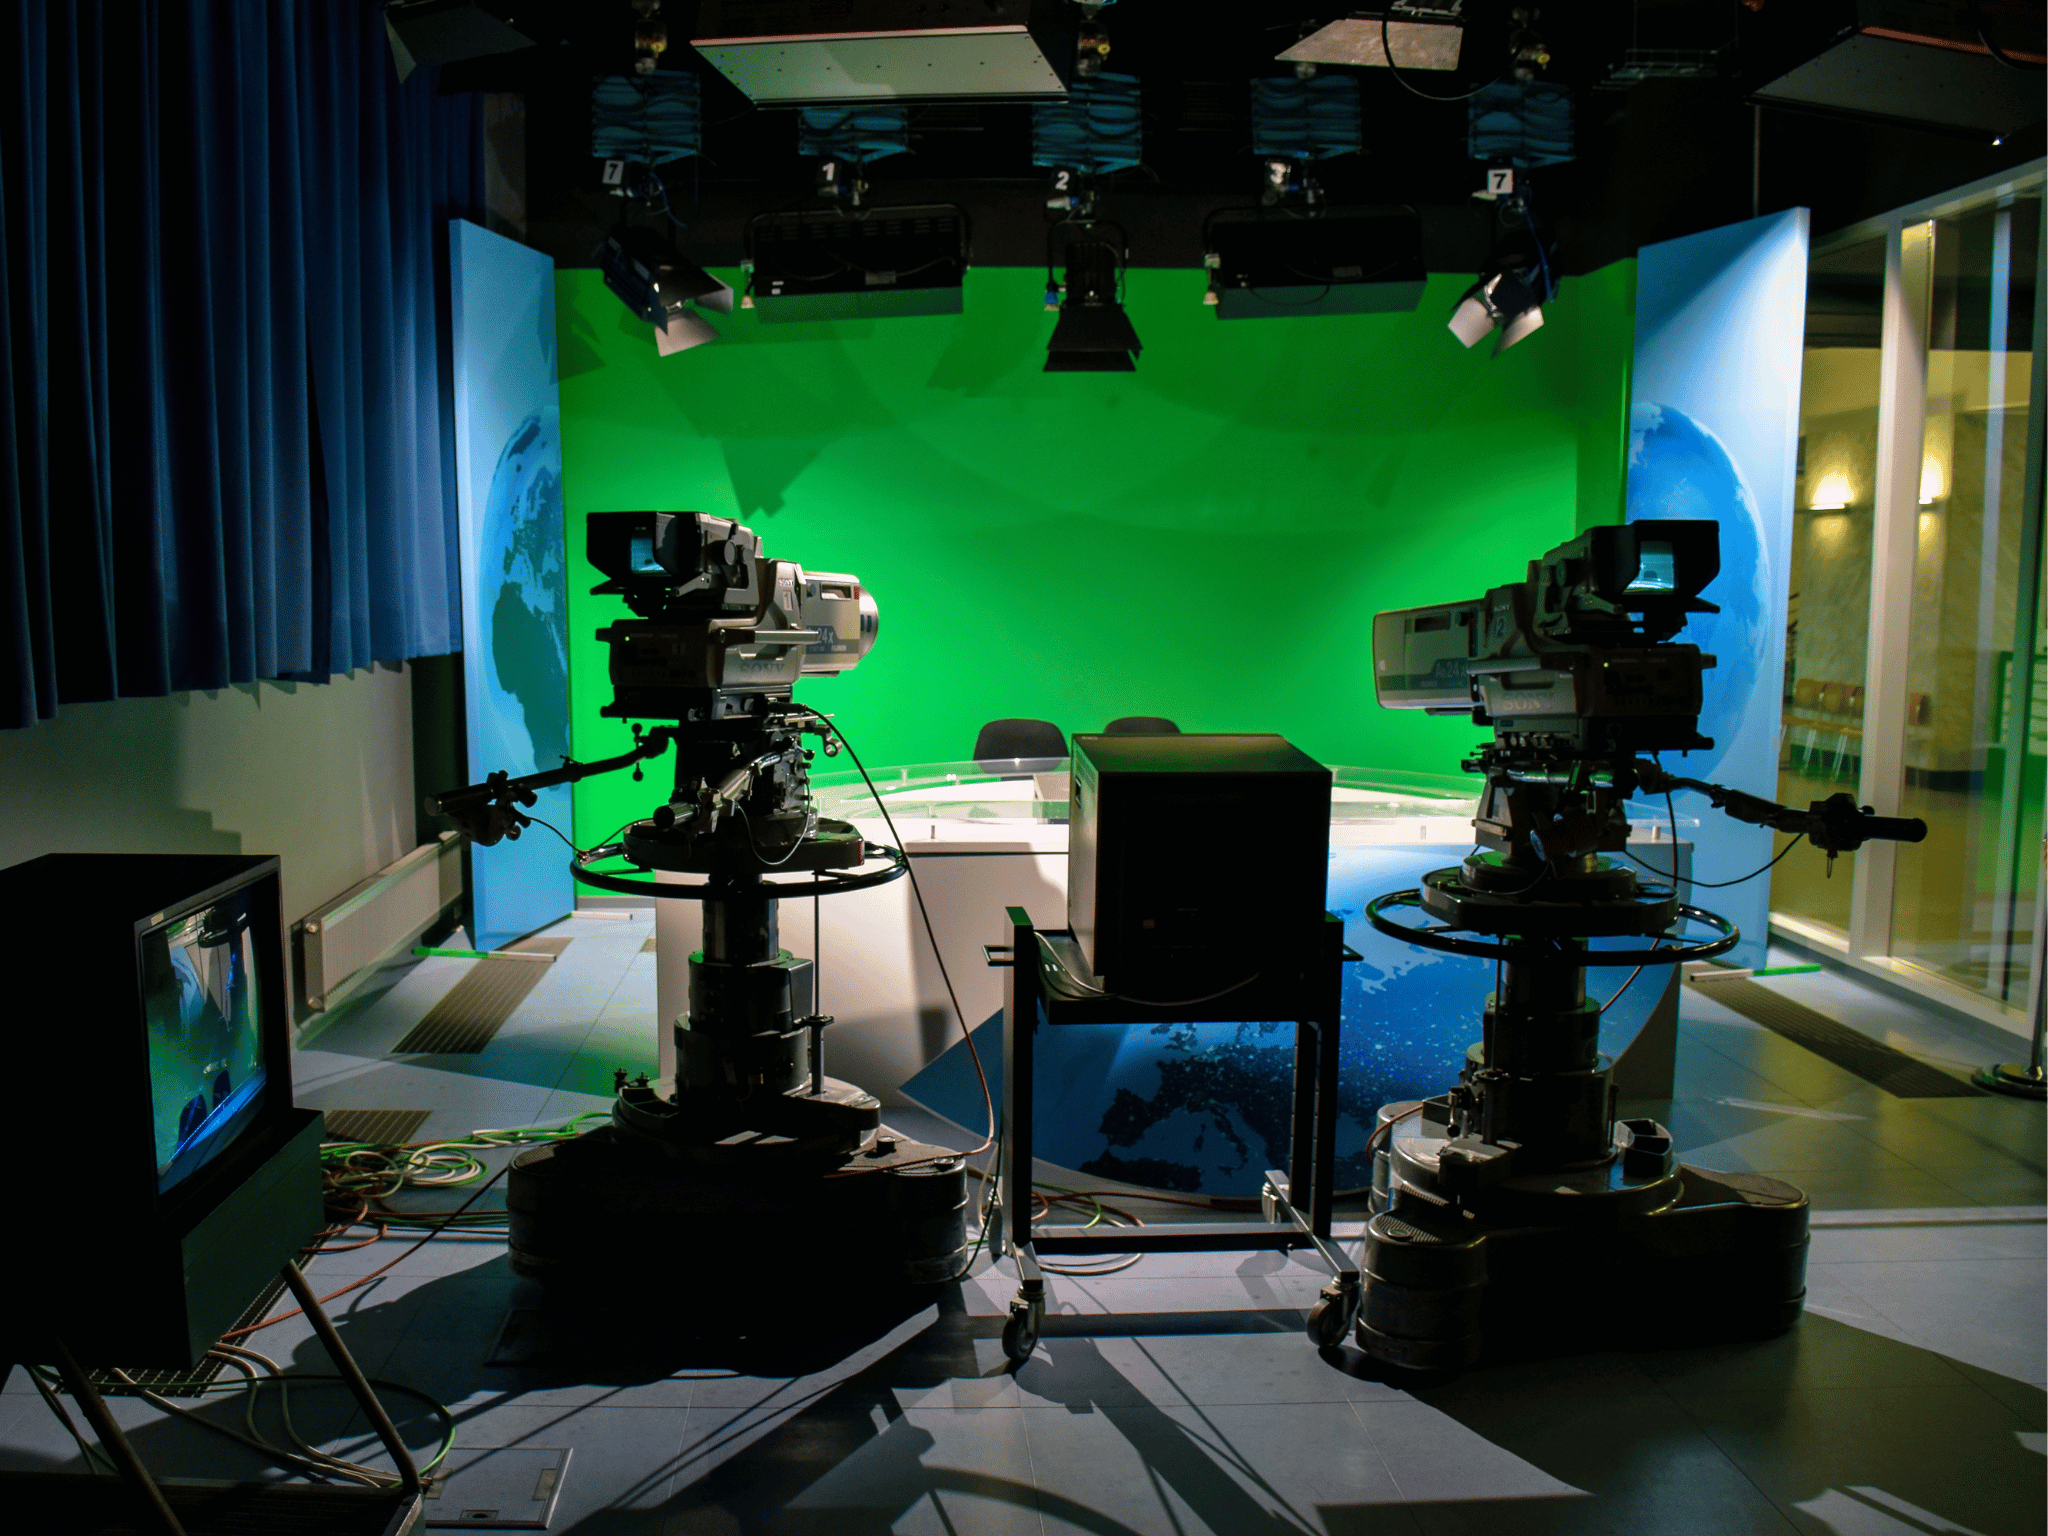 Television cameras pointing at a presenter's desk and greenscreen.